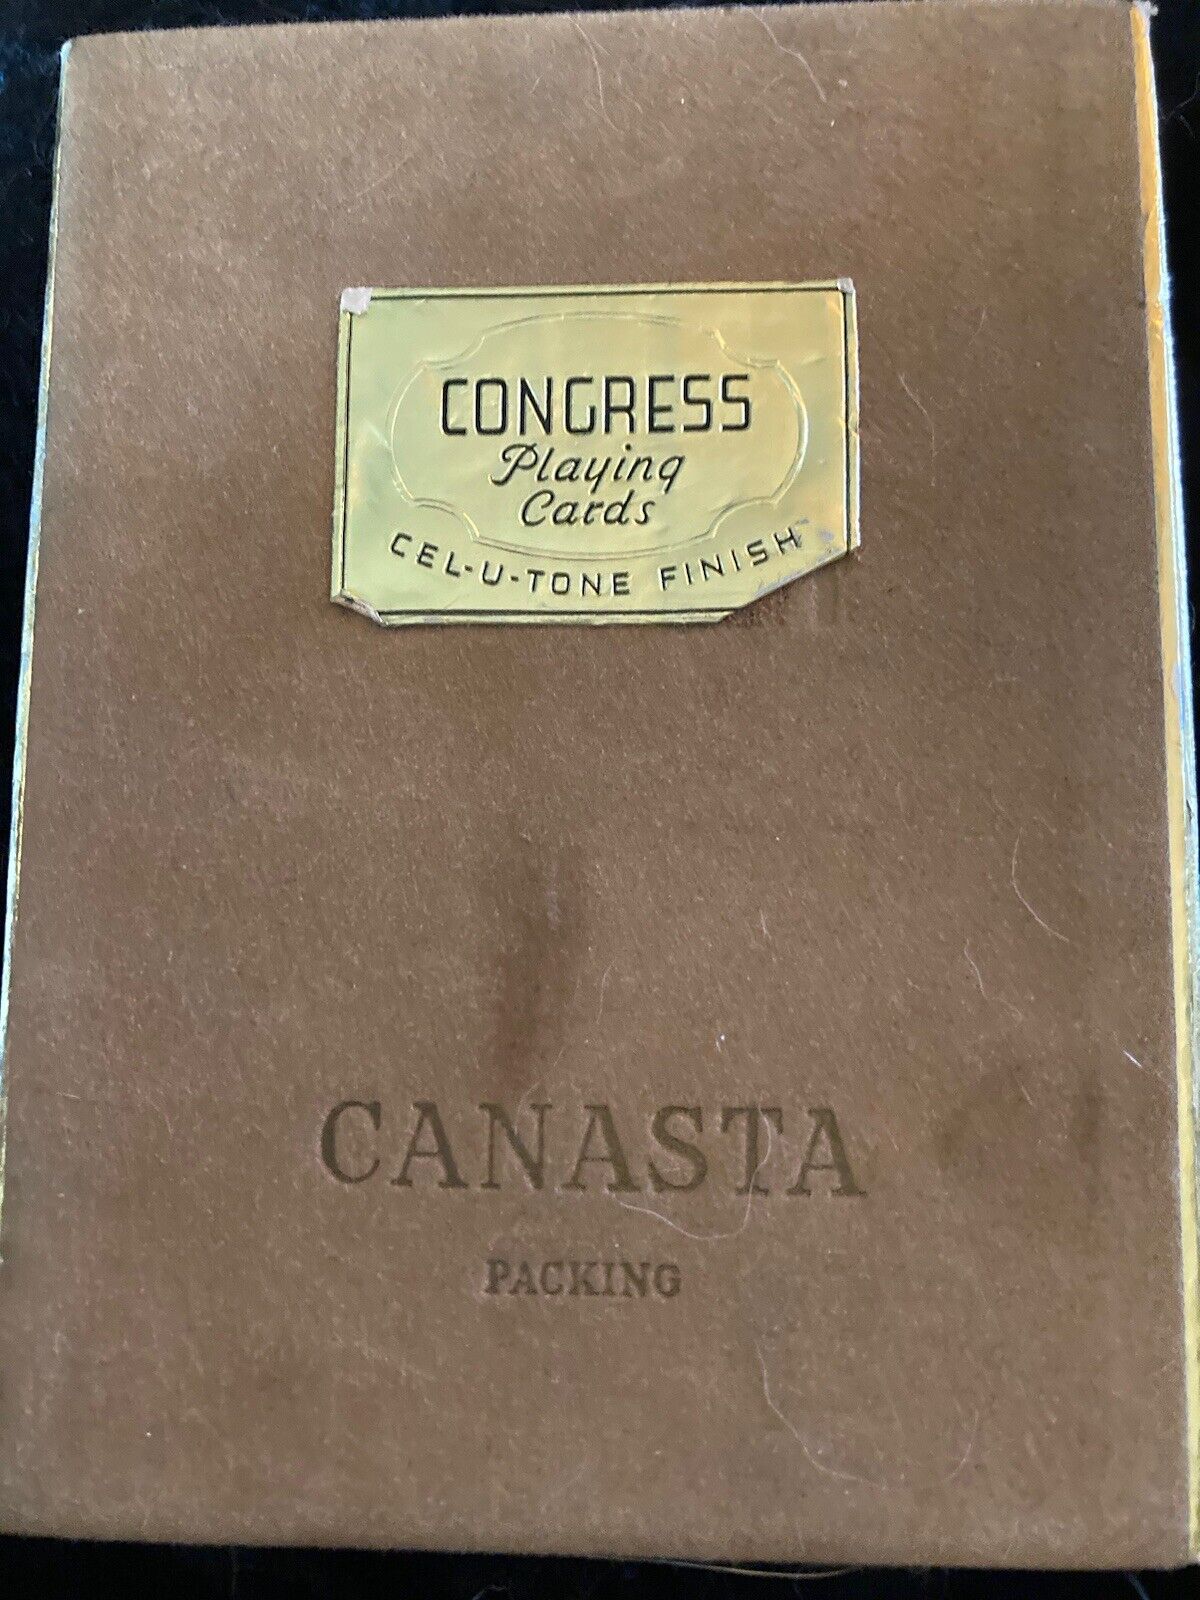 Vintage Congress Playing Cards: Two Deck Box.  Cell-u-tone FINISH FLORAL